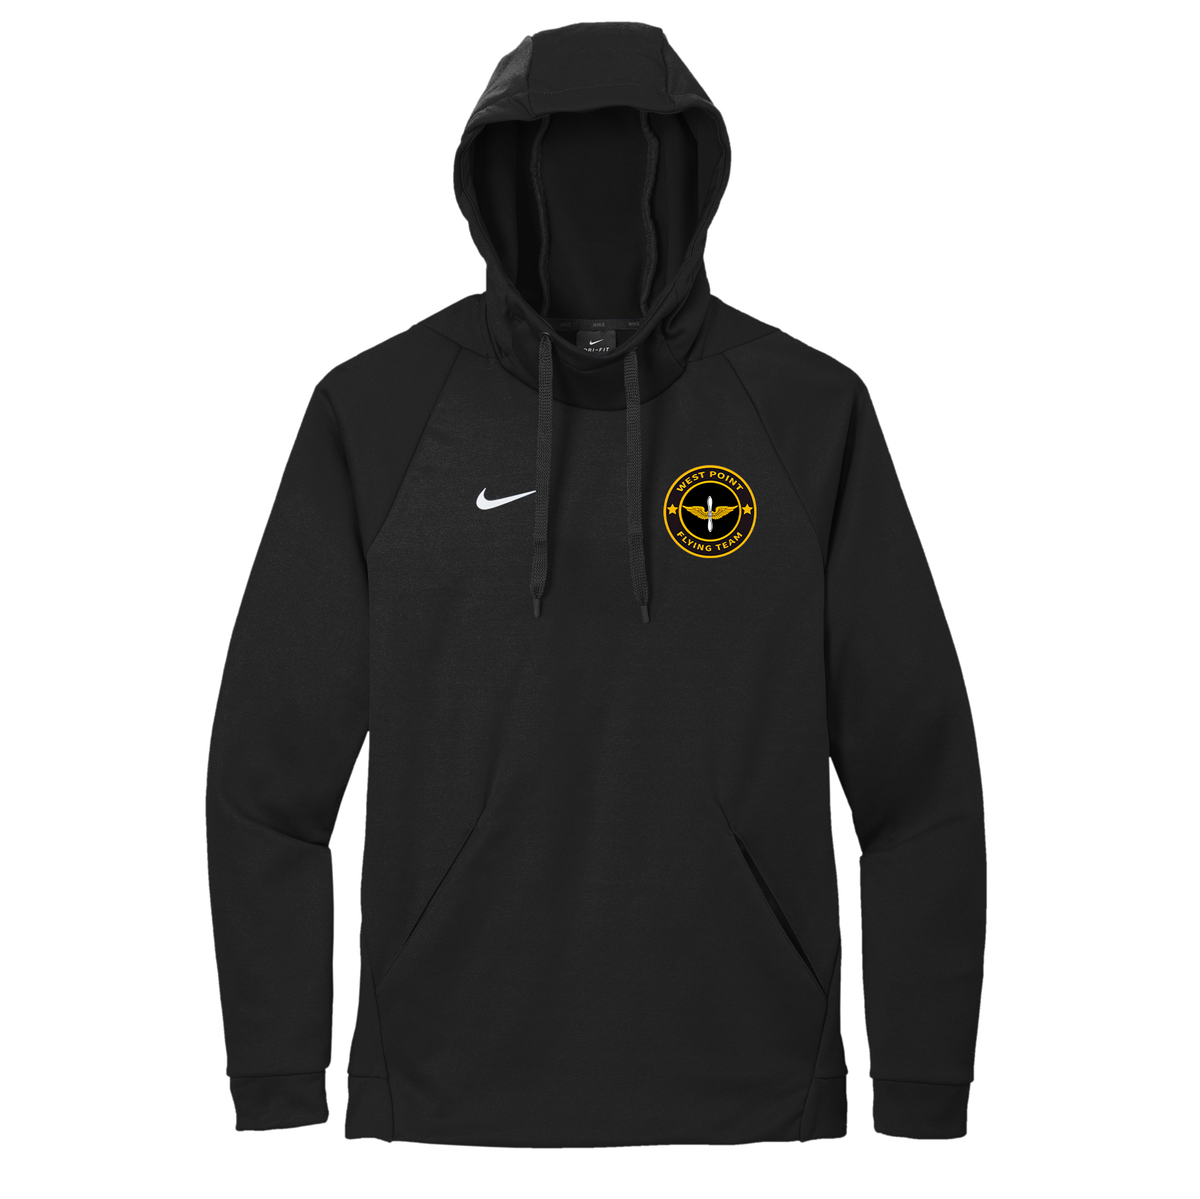 West Point Flight Team Nike Therma-FIT Embroidered Hoodie